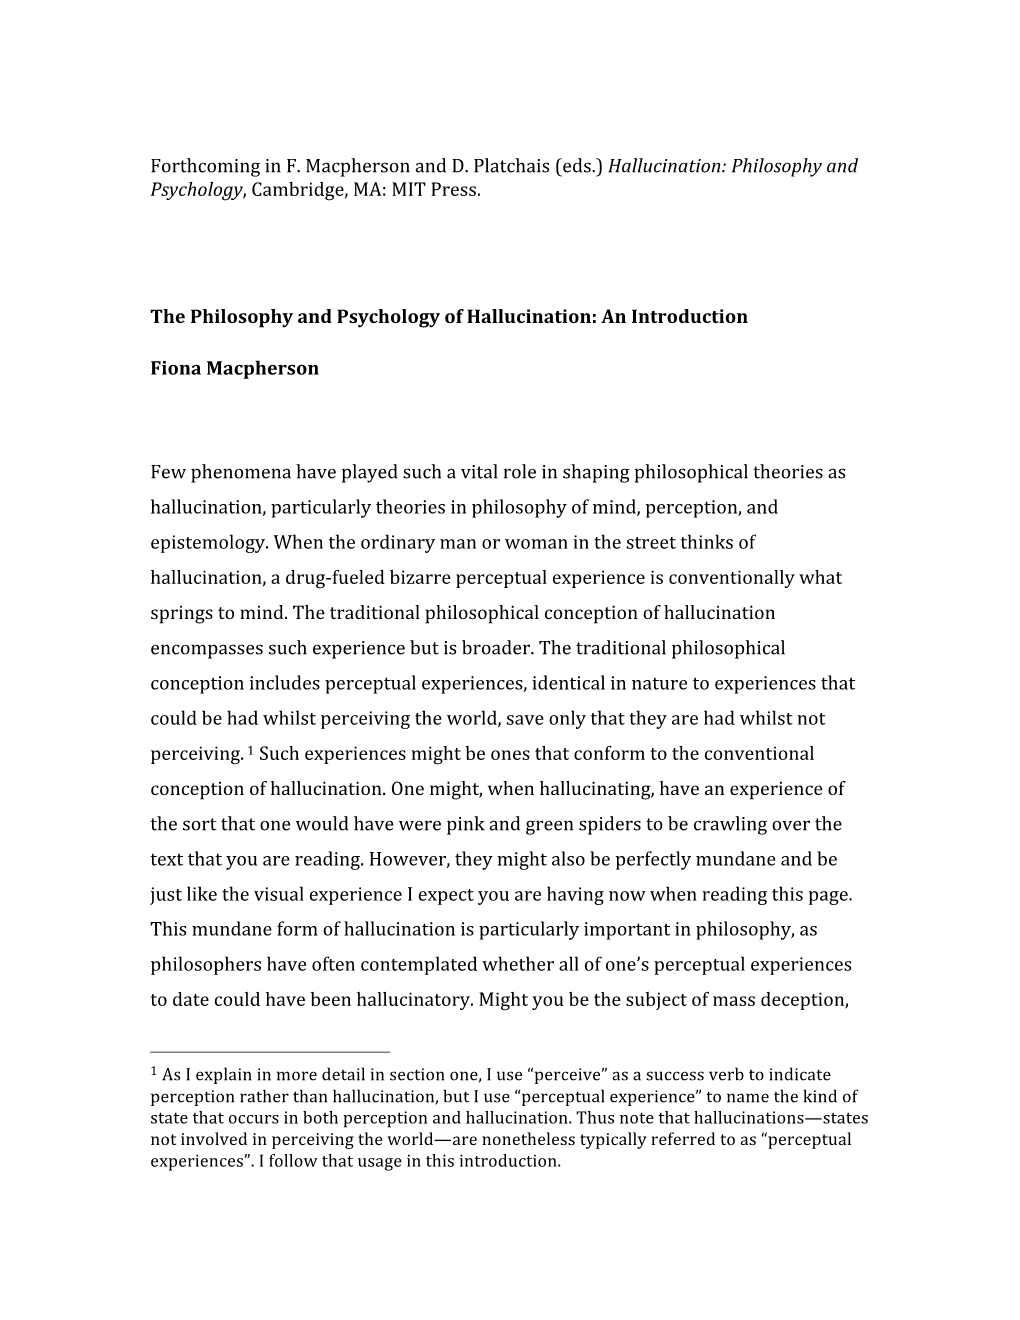 Philosophy and Psychology of Hallucination: an Introduction